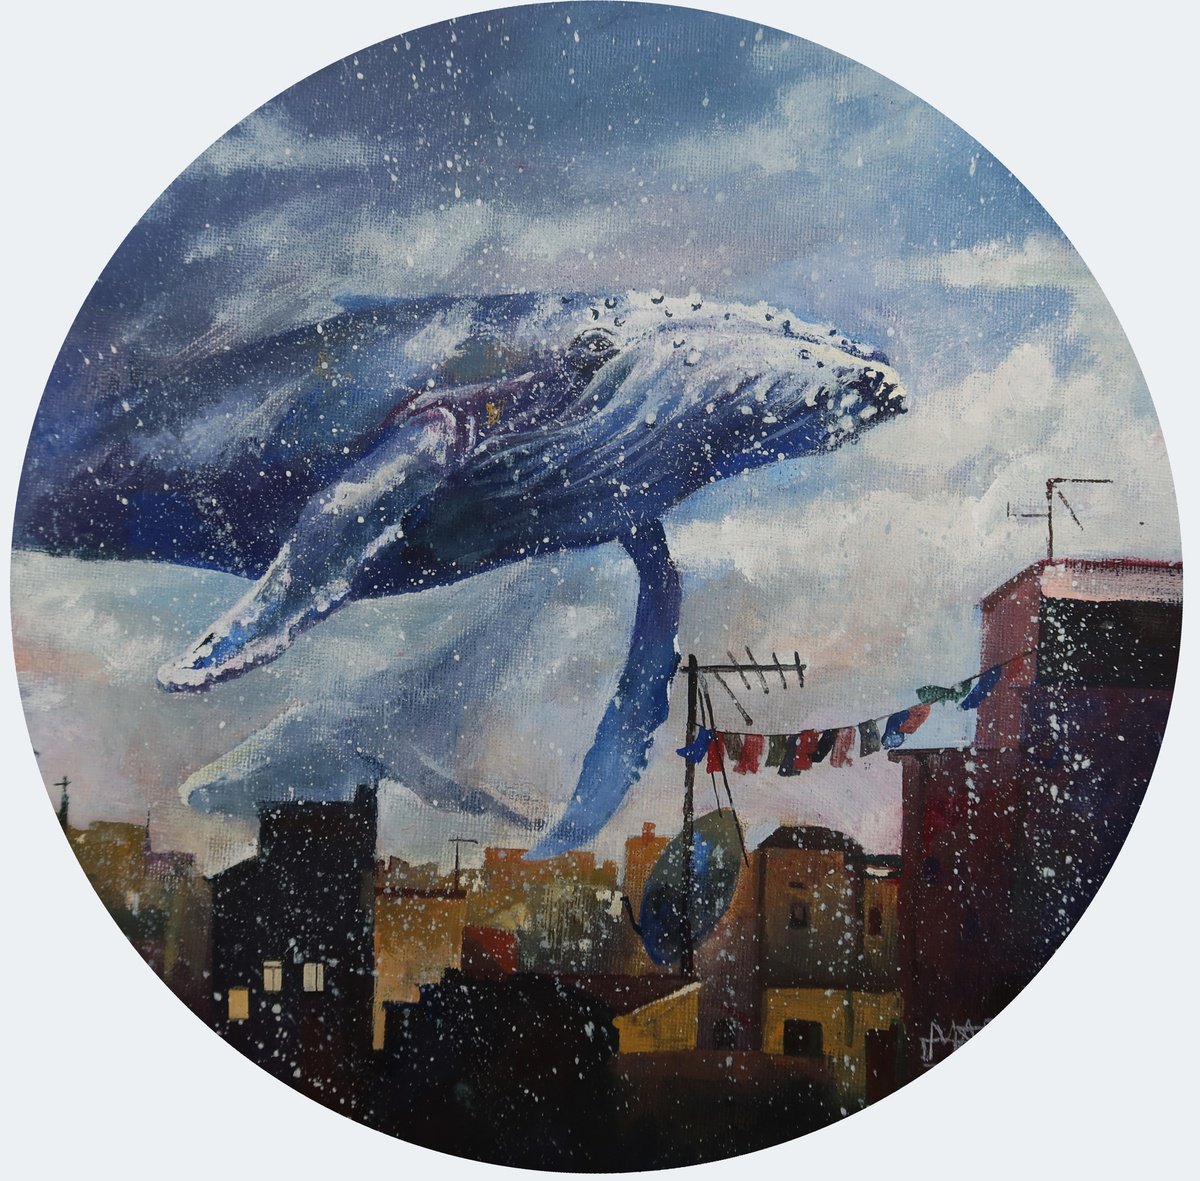 Hail-whales under the rooftops of Barcelona. by MARIA GURIKHINA